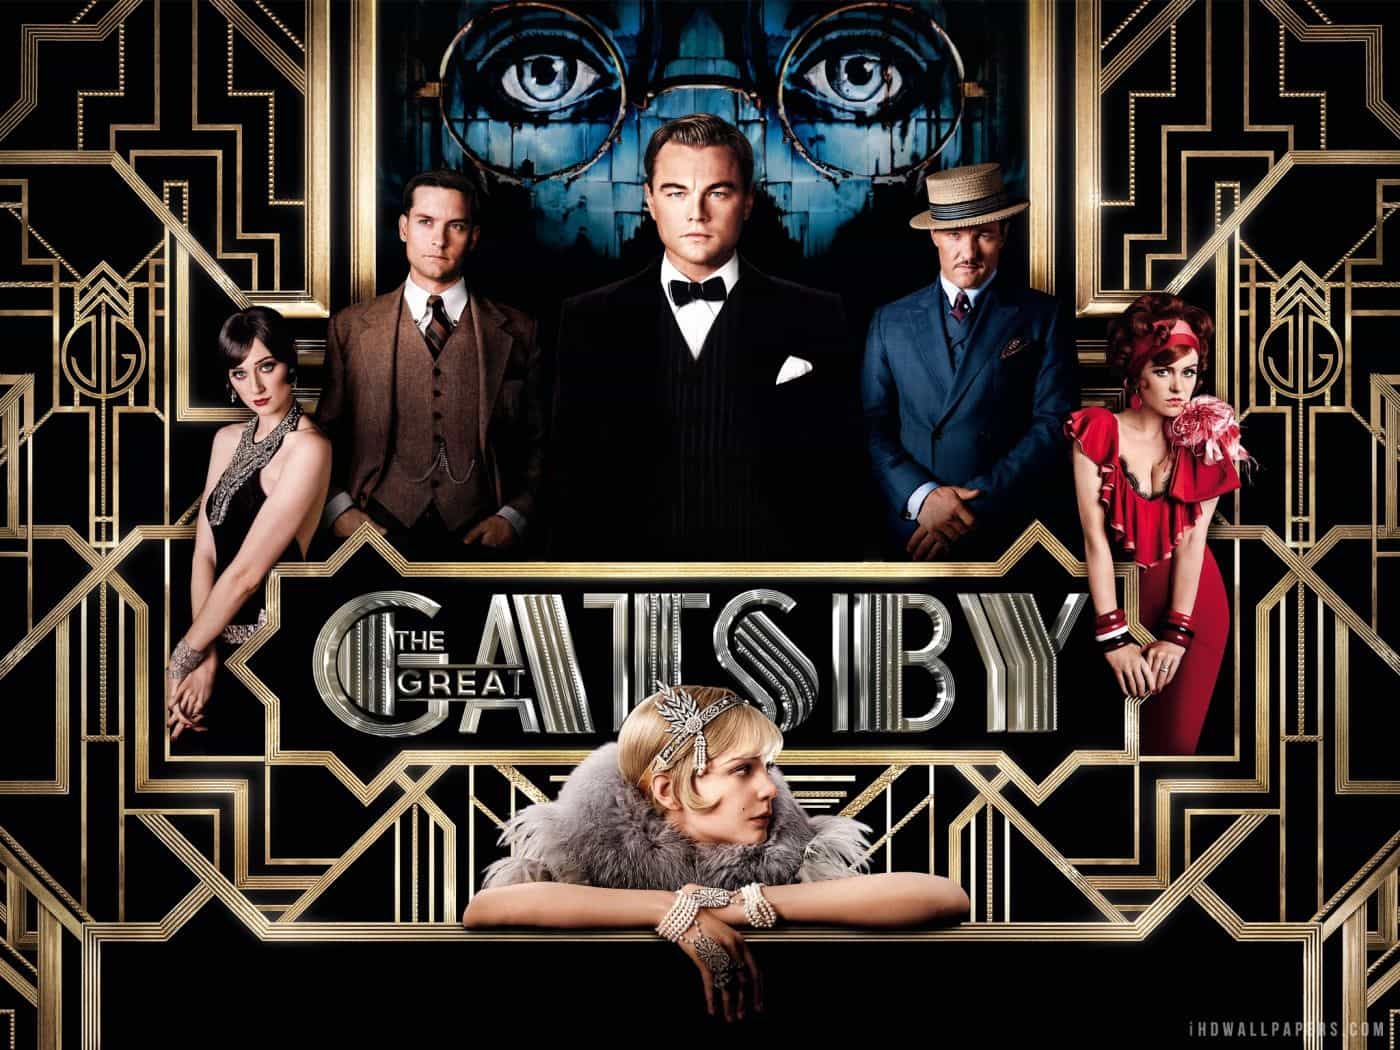 Checkout The Great Gatsby Characters and Cast: Who they are?